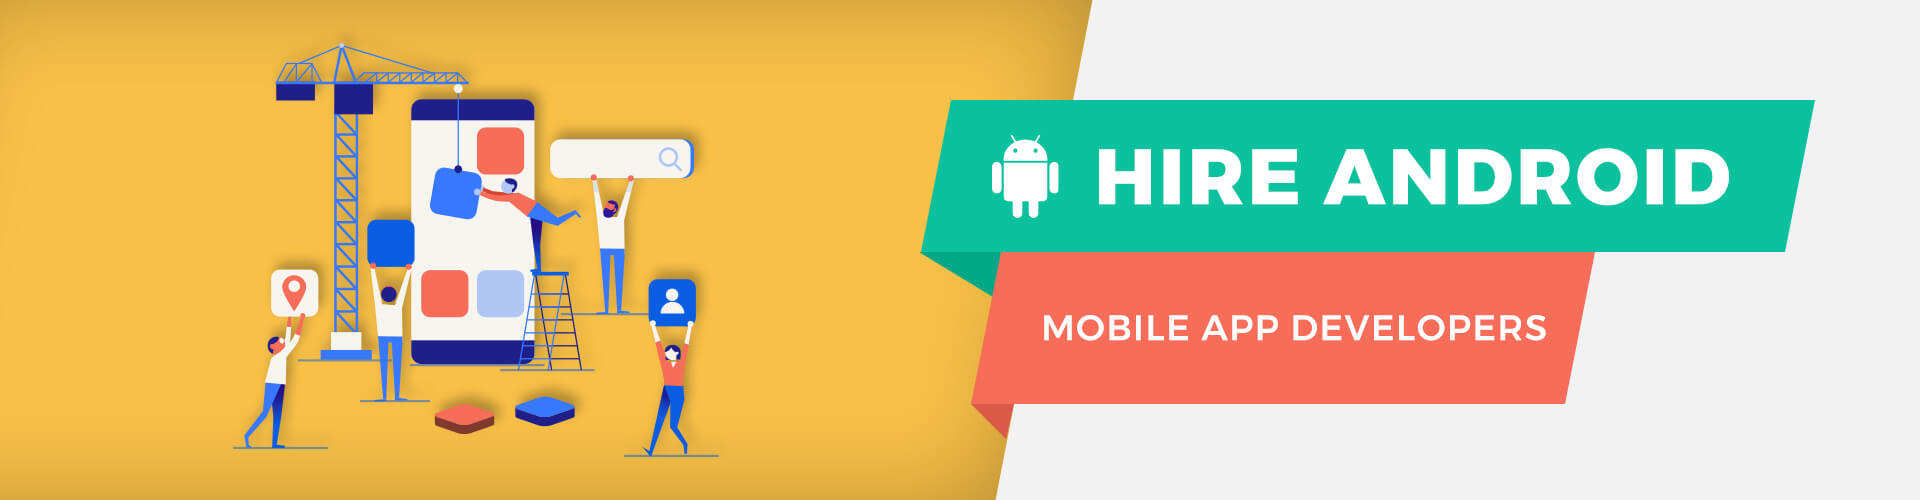 hire android mobile app developer